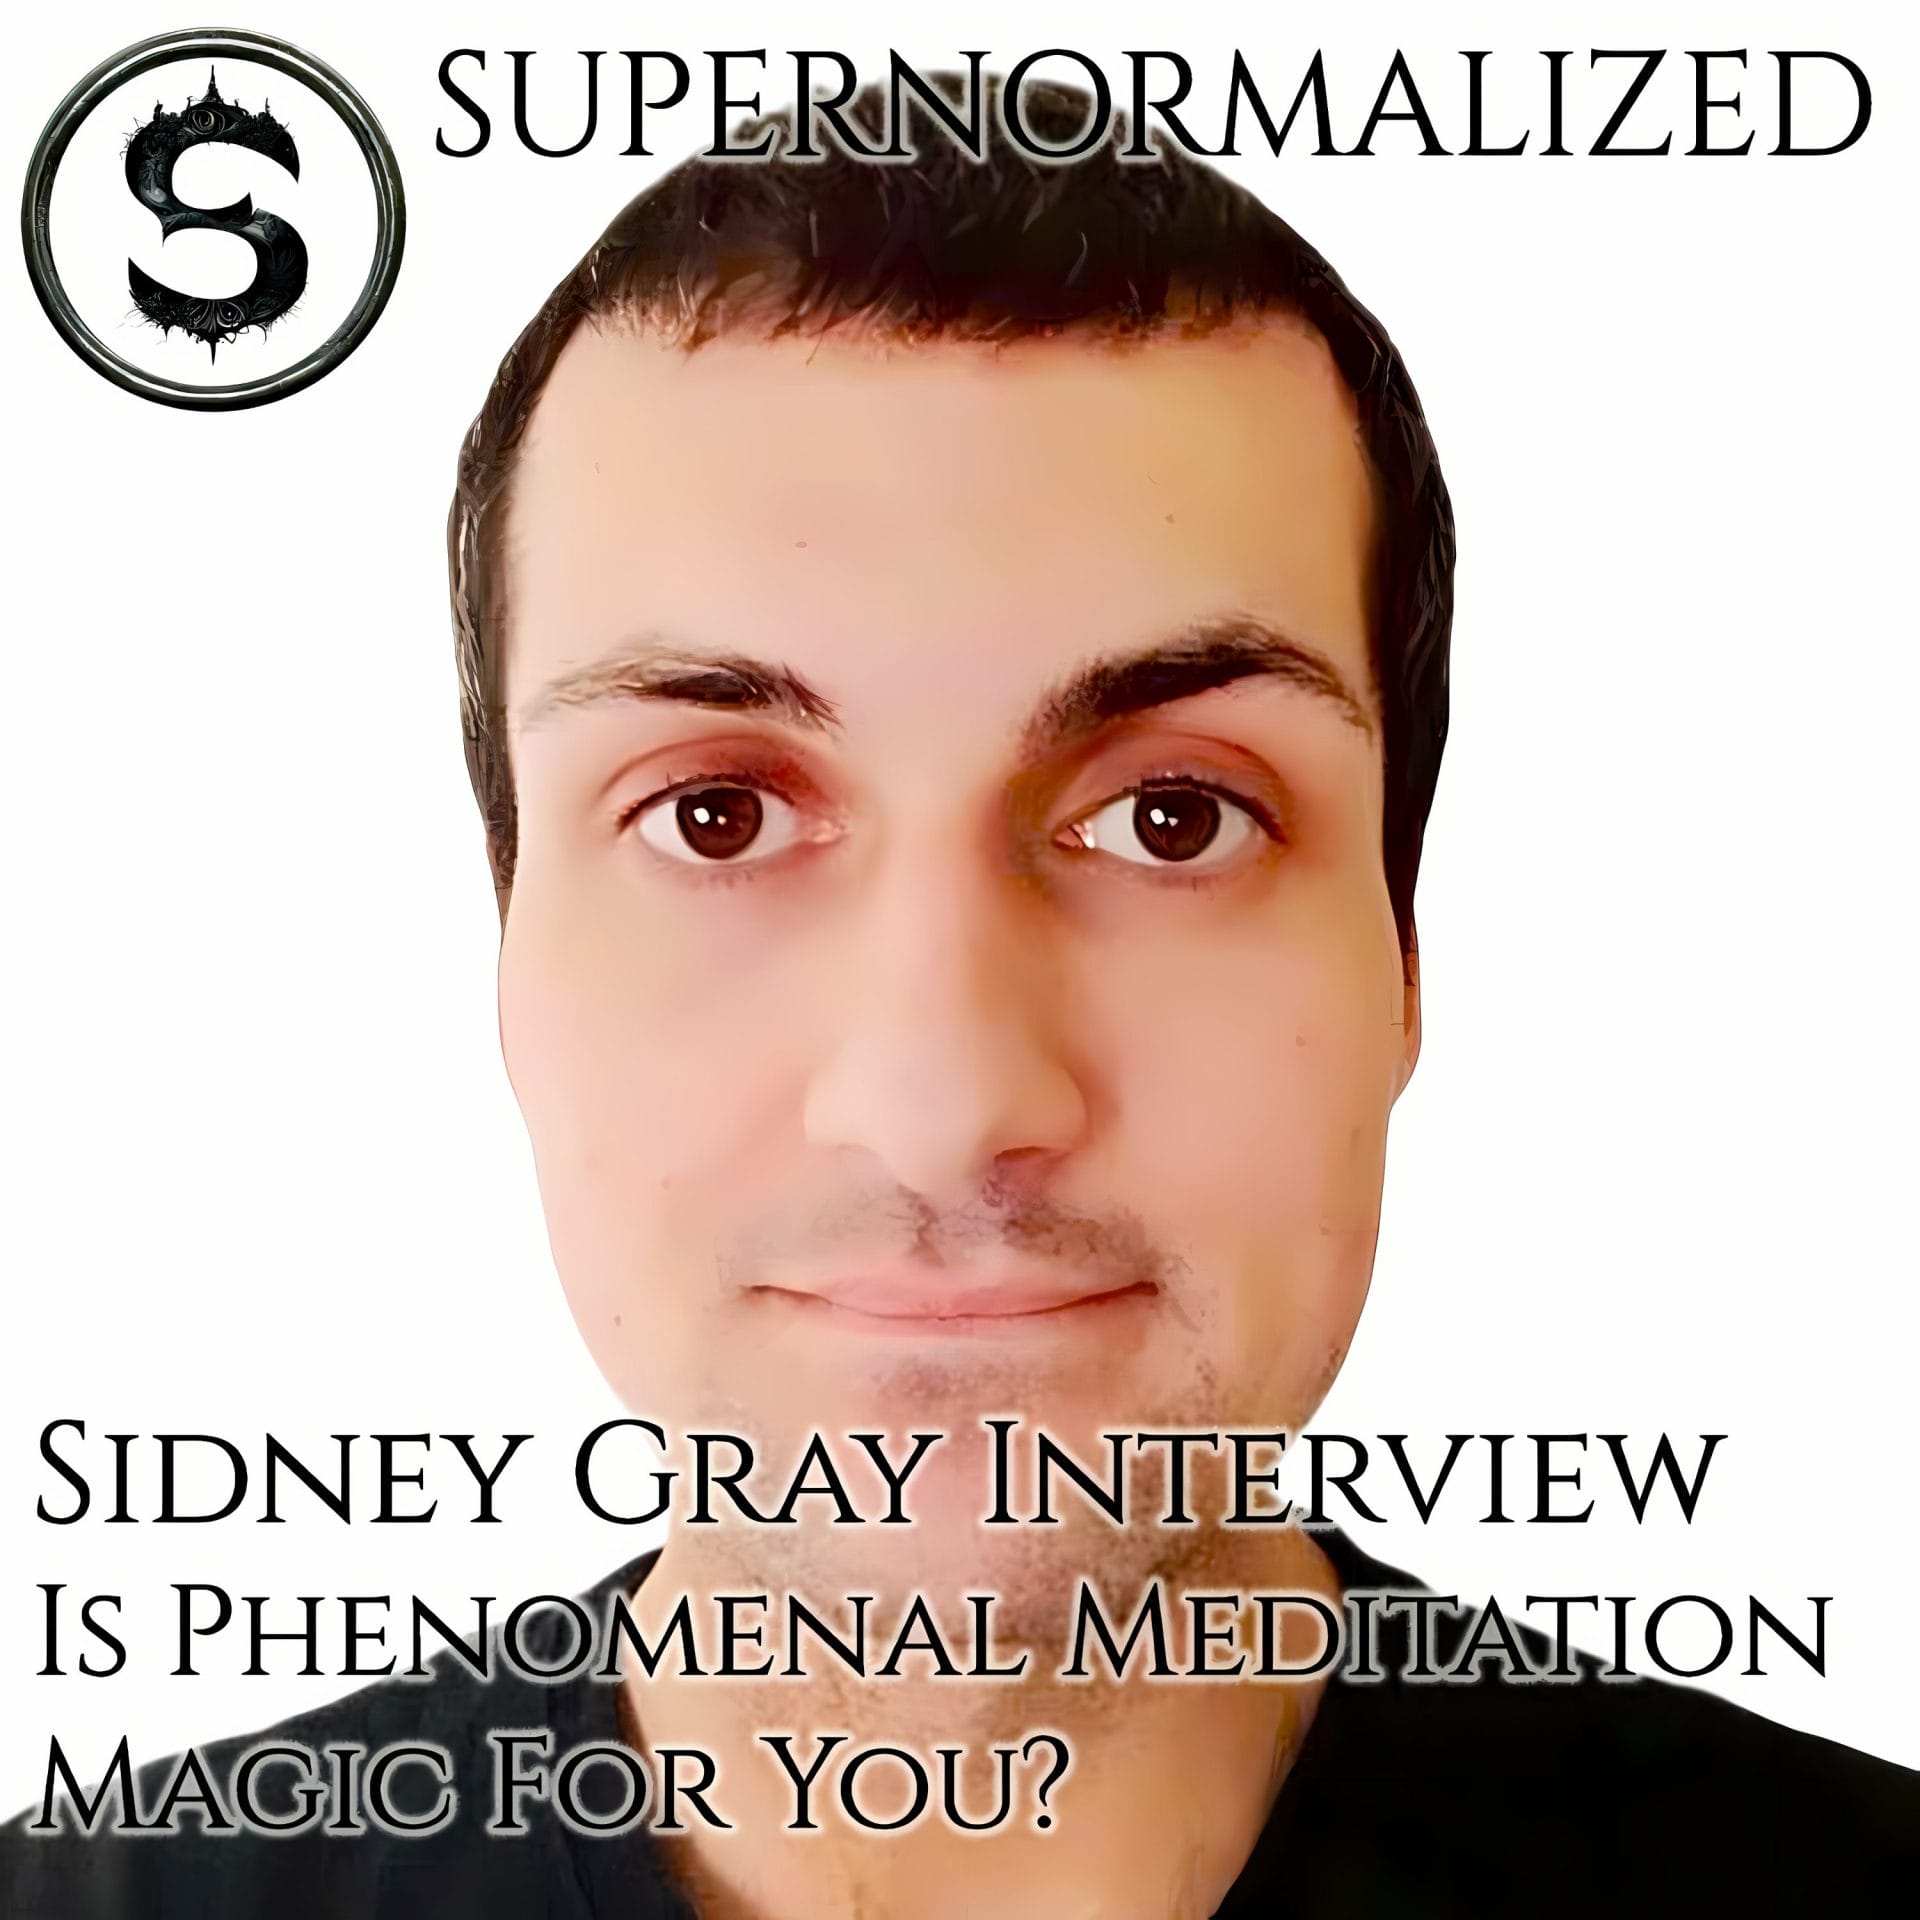 Sidney Gray Interview Is Phenomenal Meditation Magic For You?